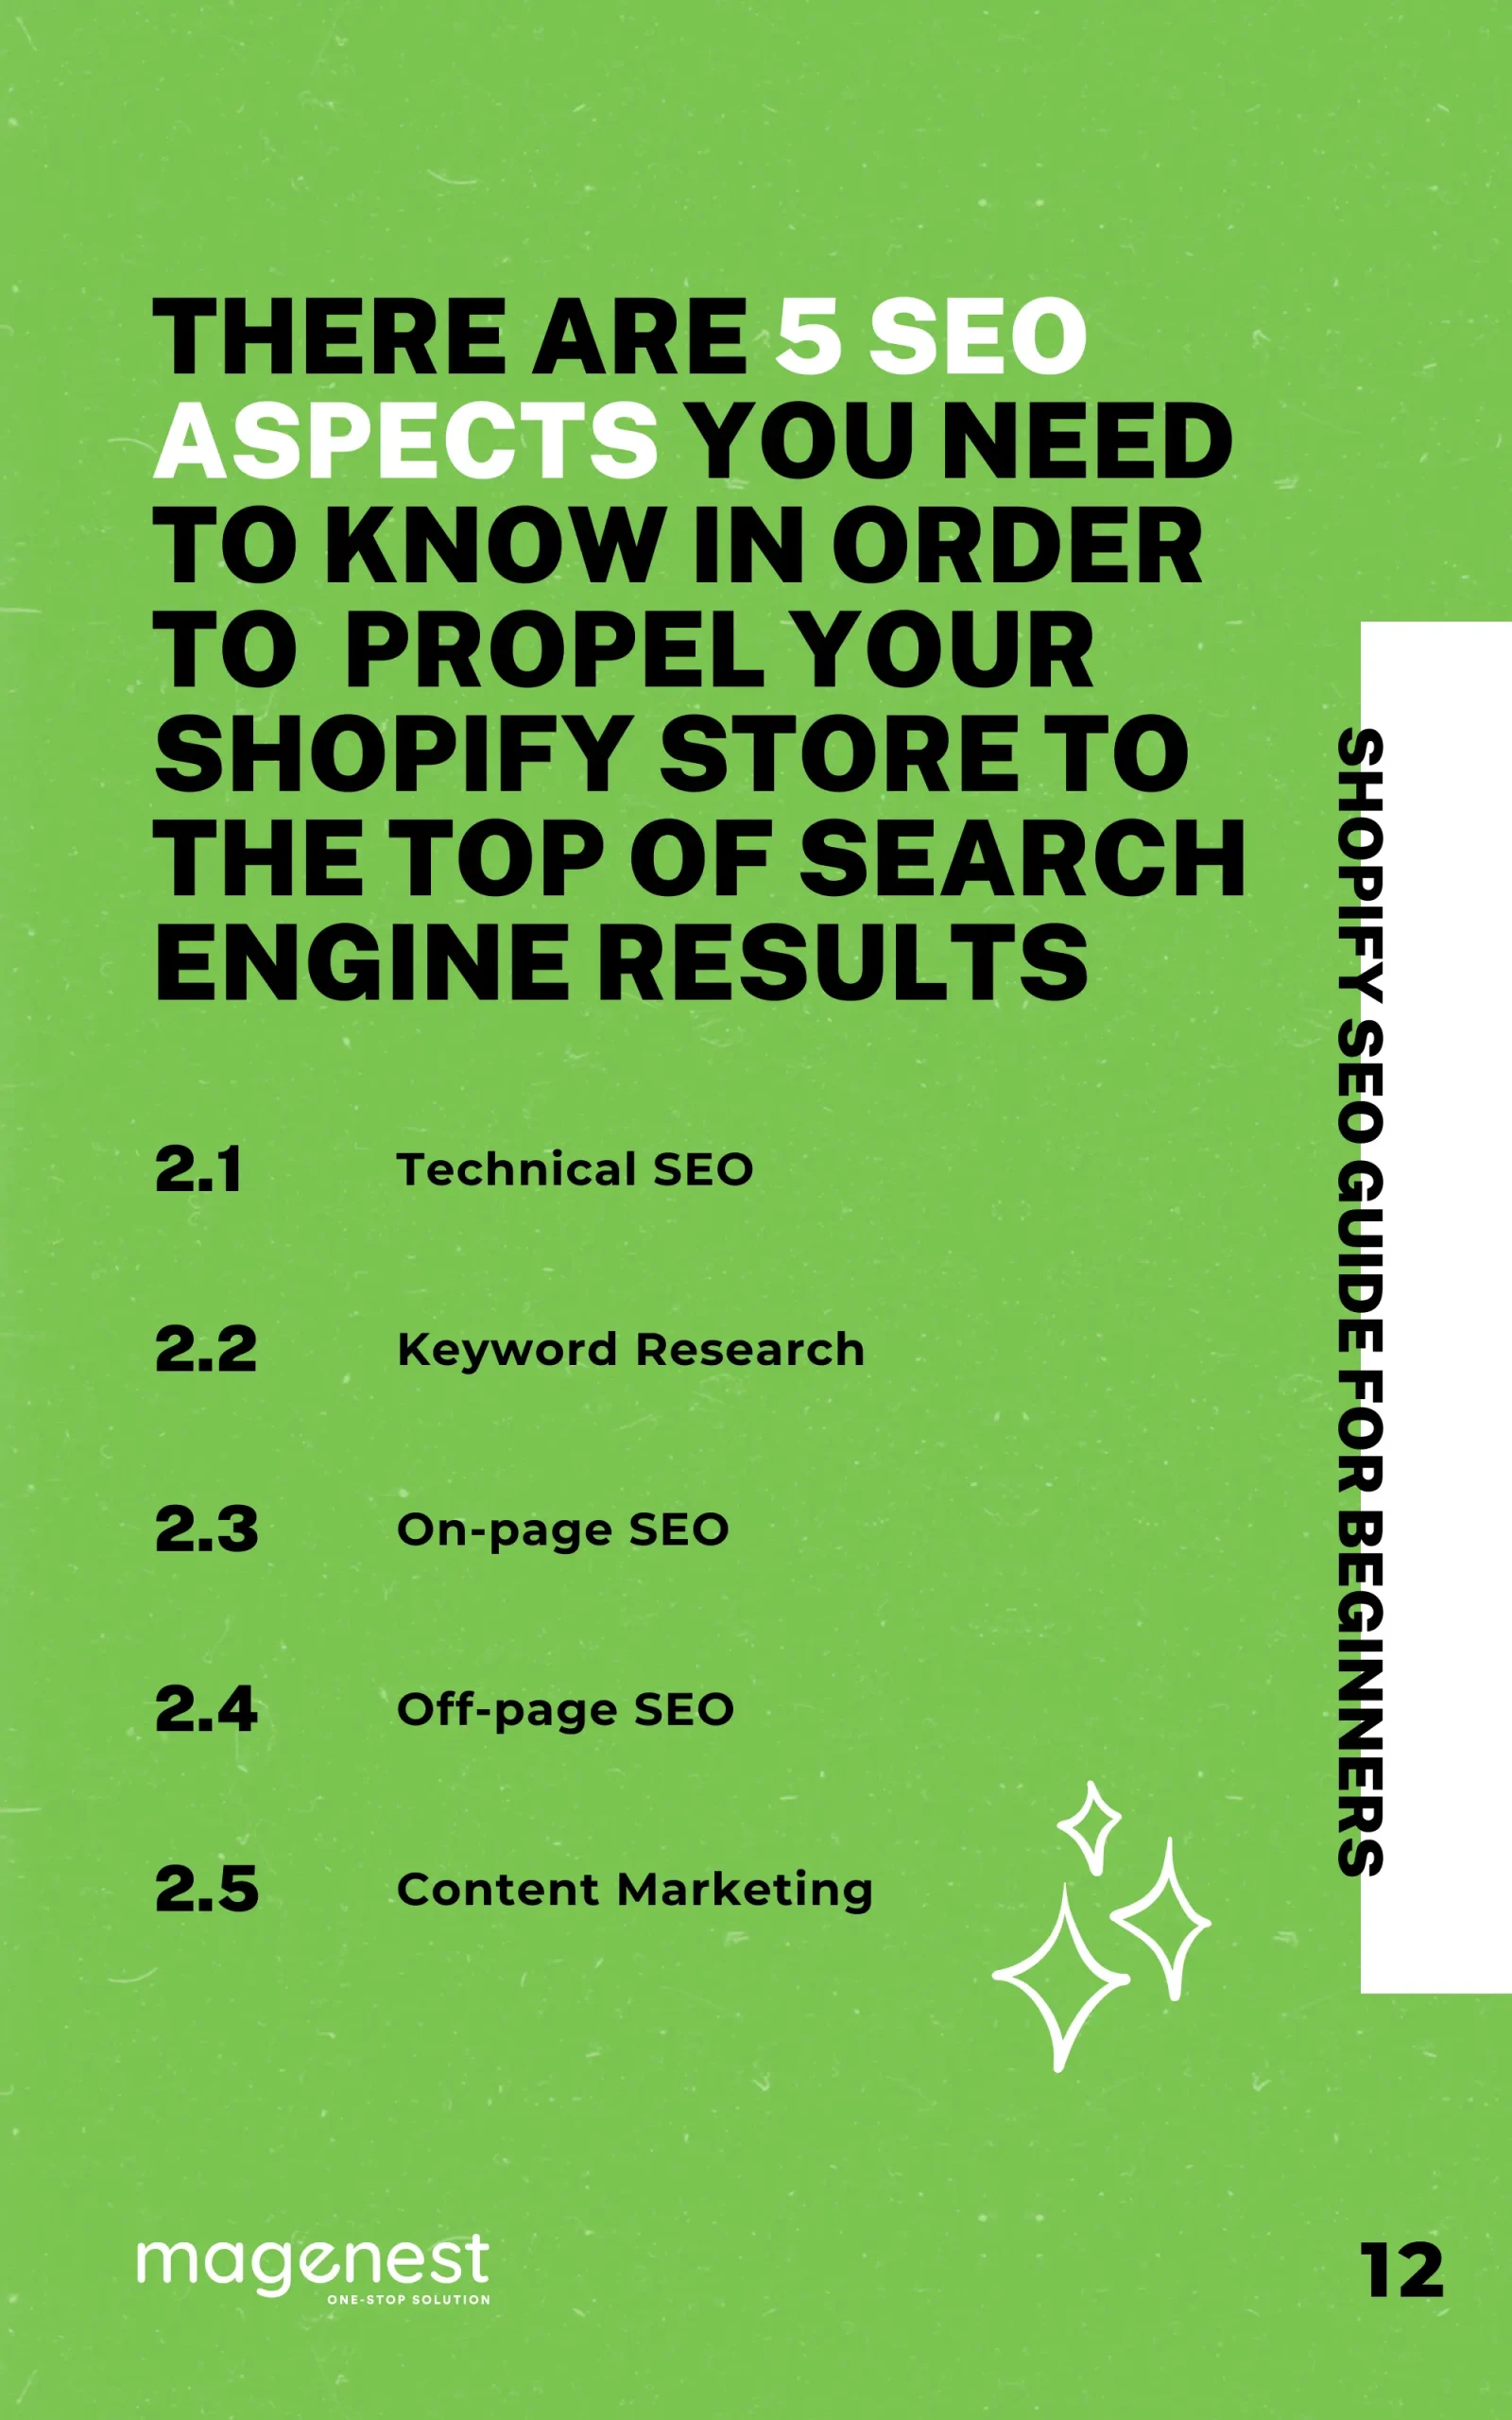 eBook SHOPIFY SEO GUIDE PART 1: All you need to know about Shopify SEO1